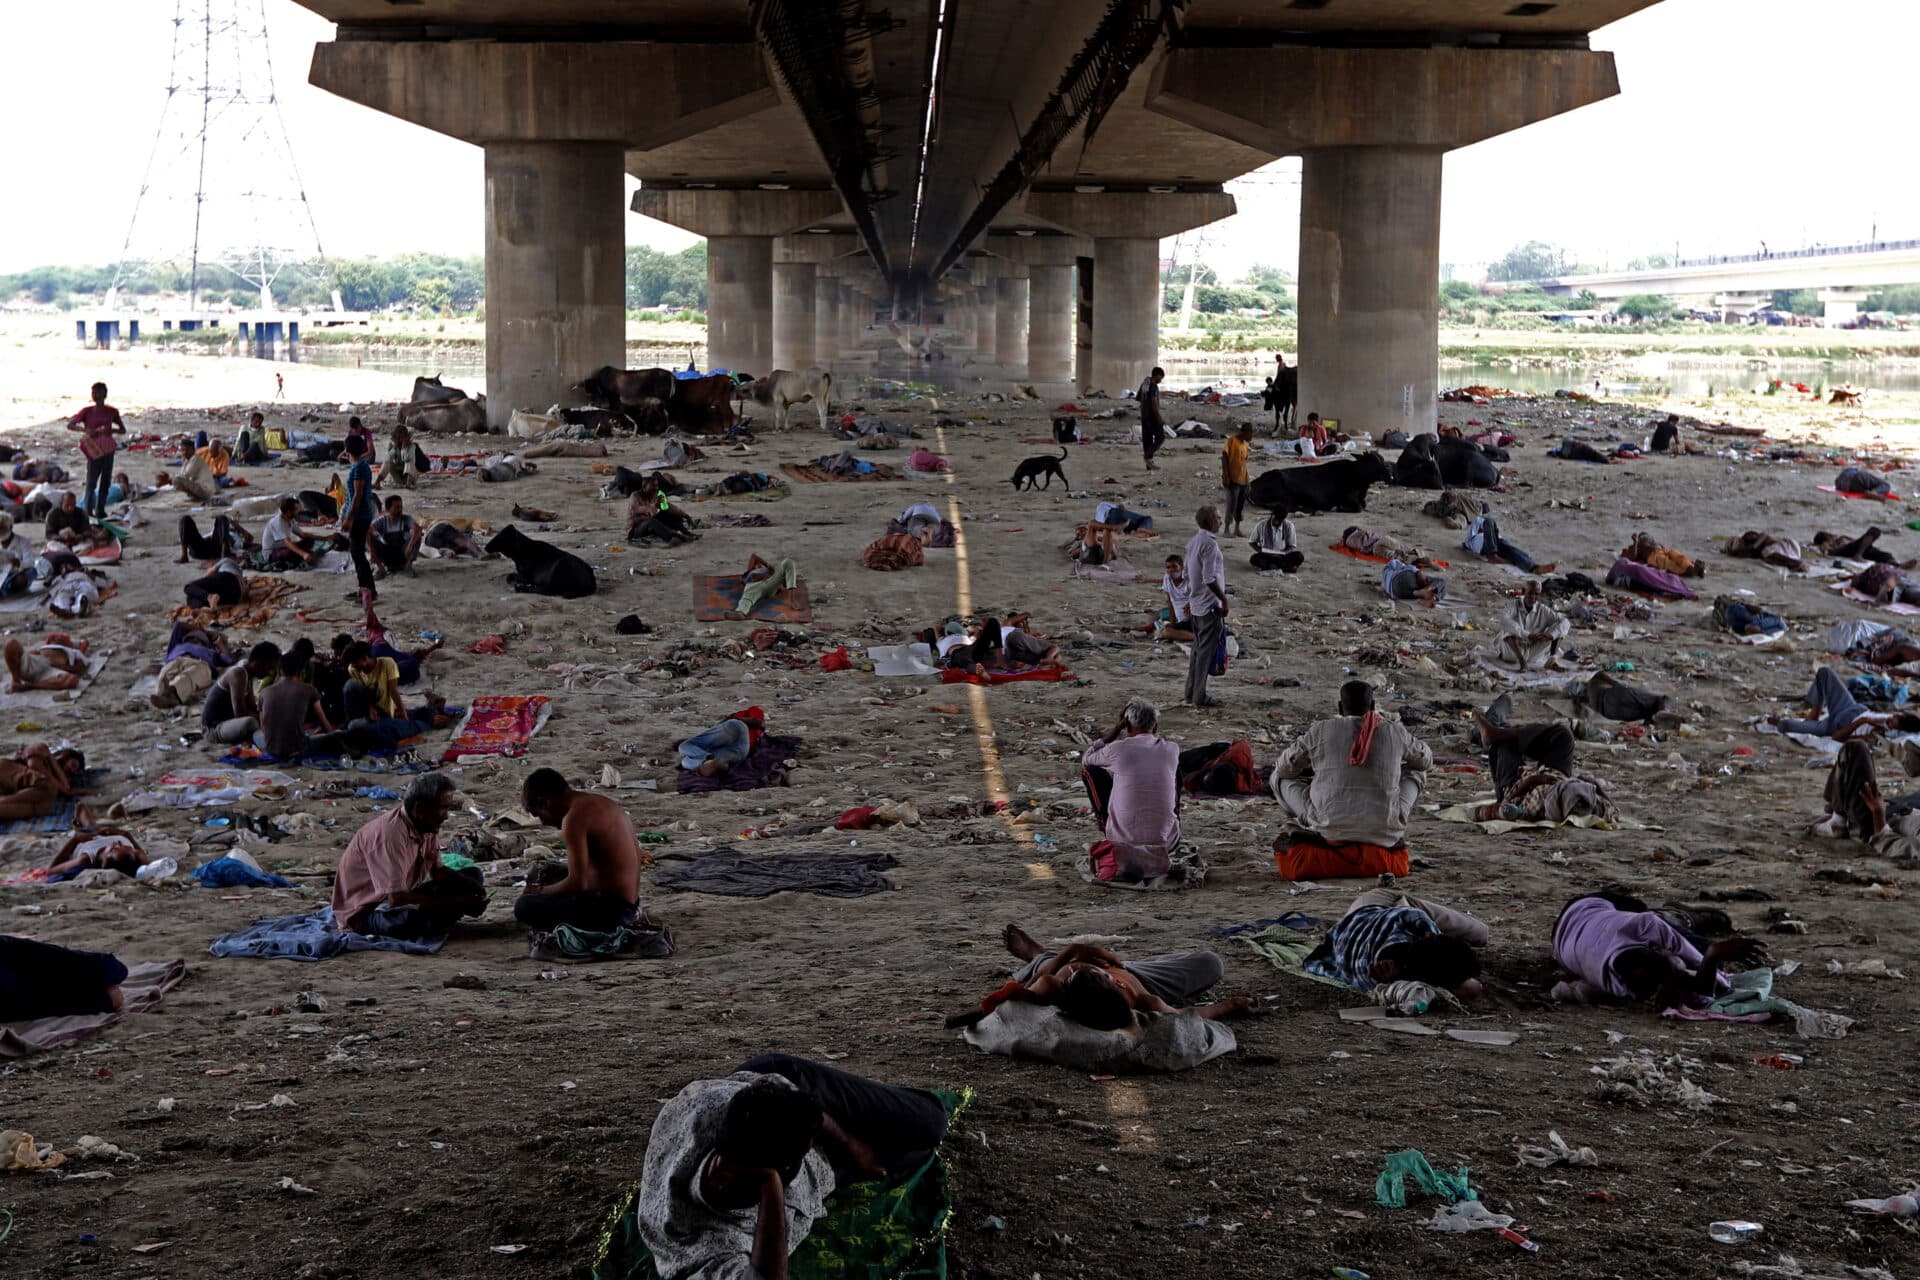 People sheltering from heat under a bridge at the Yamuna River bed in New Delhi on May 10, 2022. (Photo by Amarjeet Kumar Singh/Anadolu Agency via Getty Images)